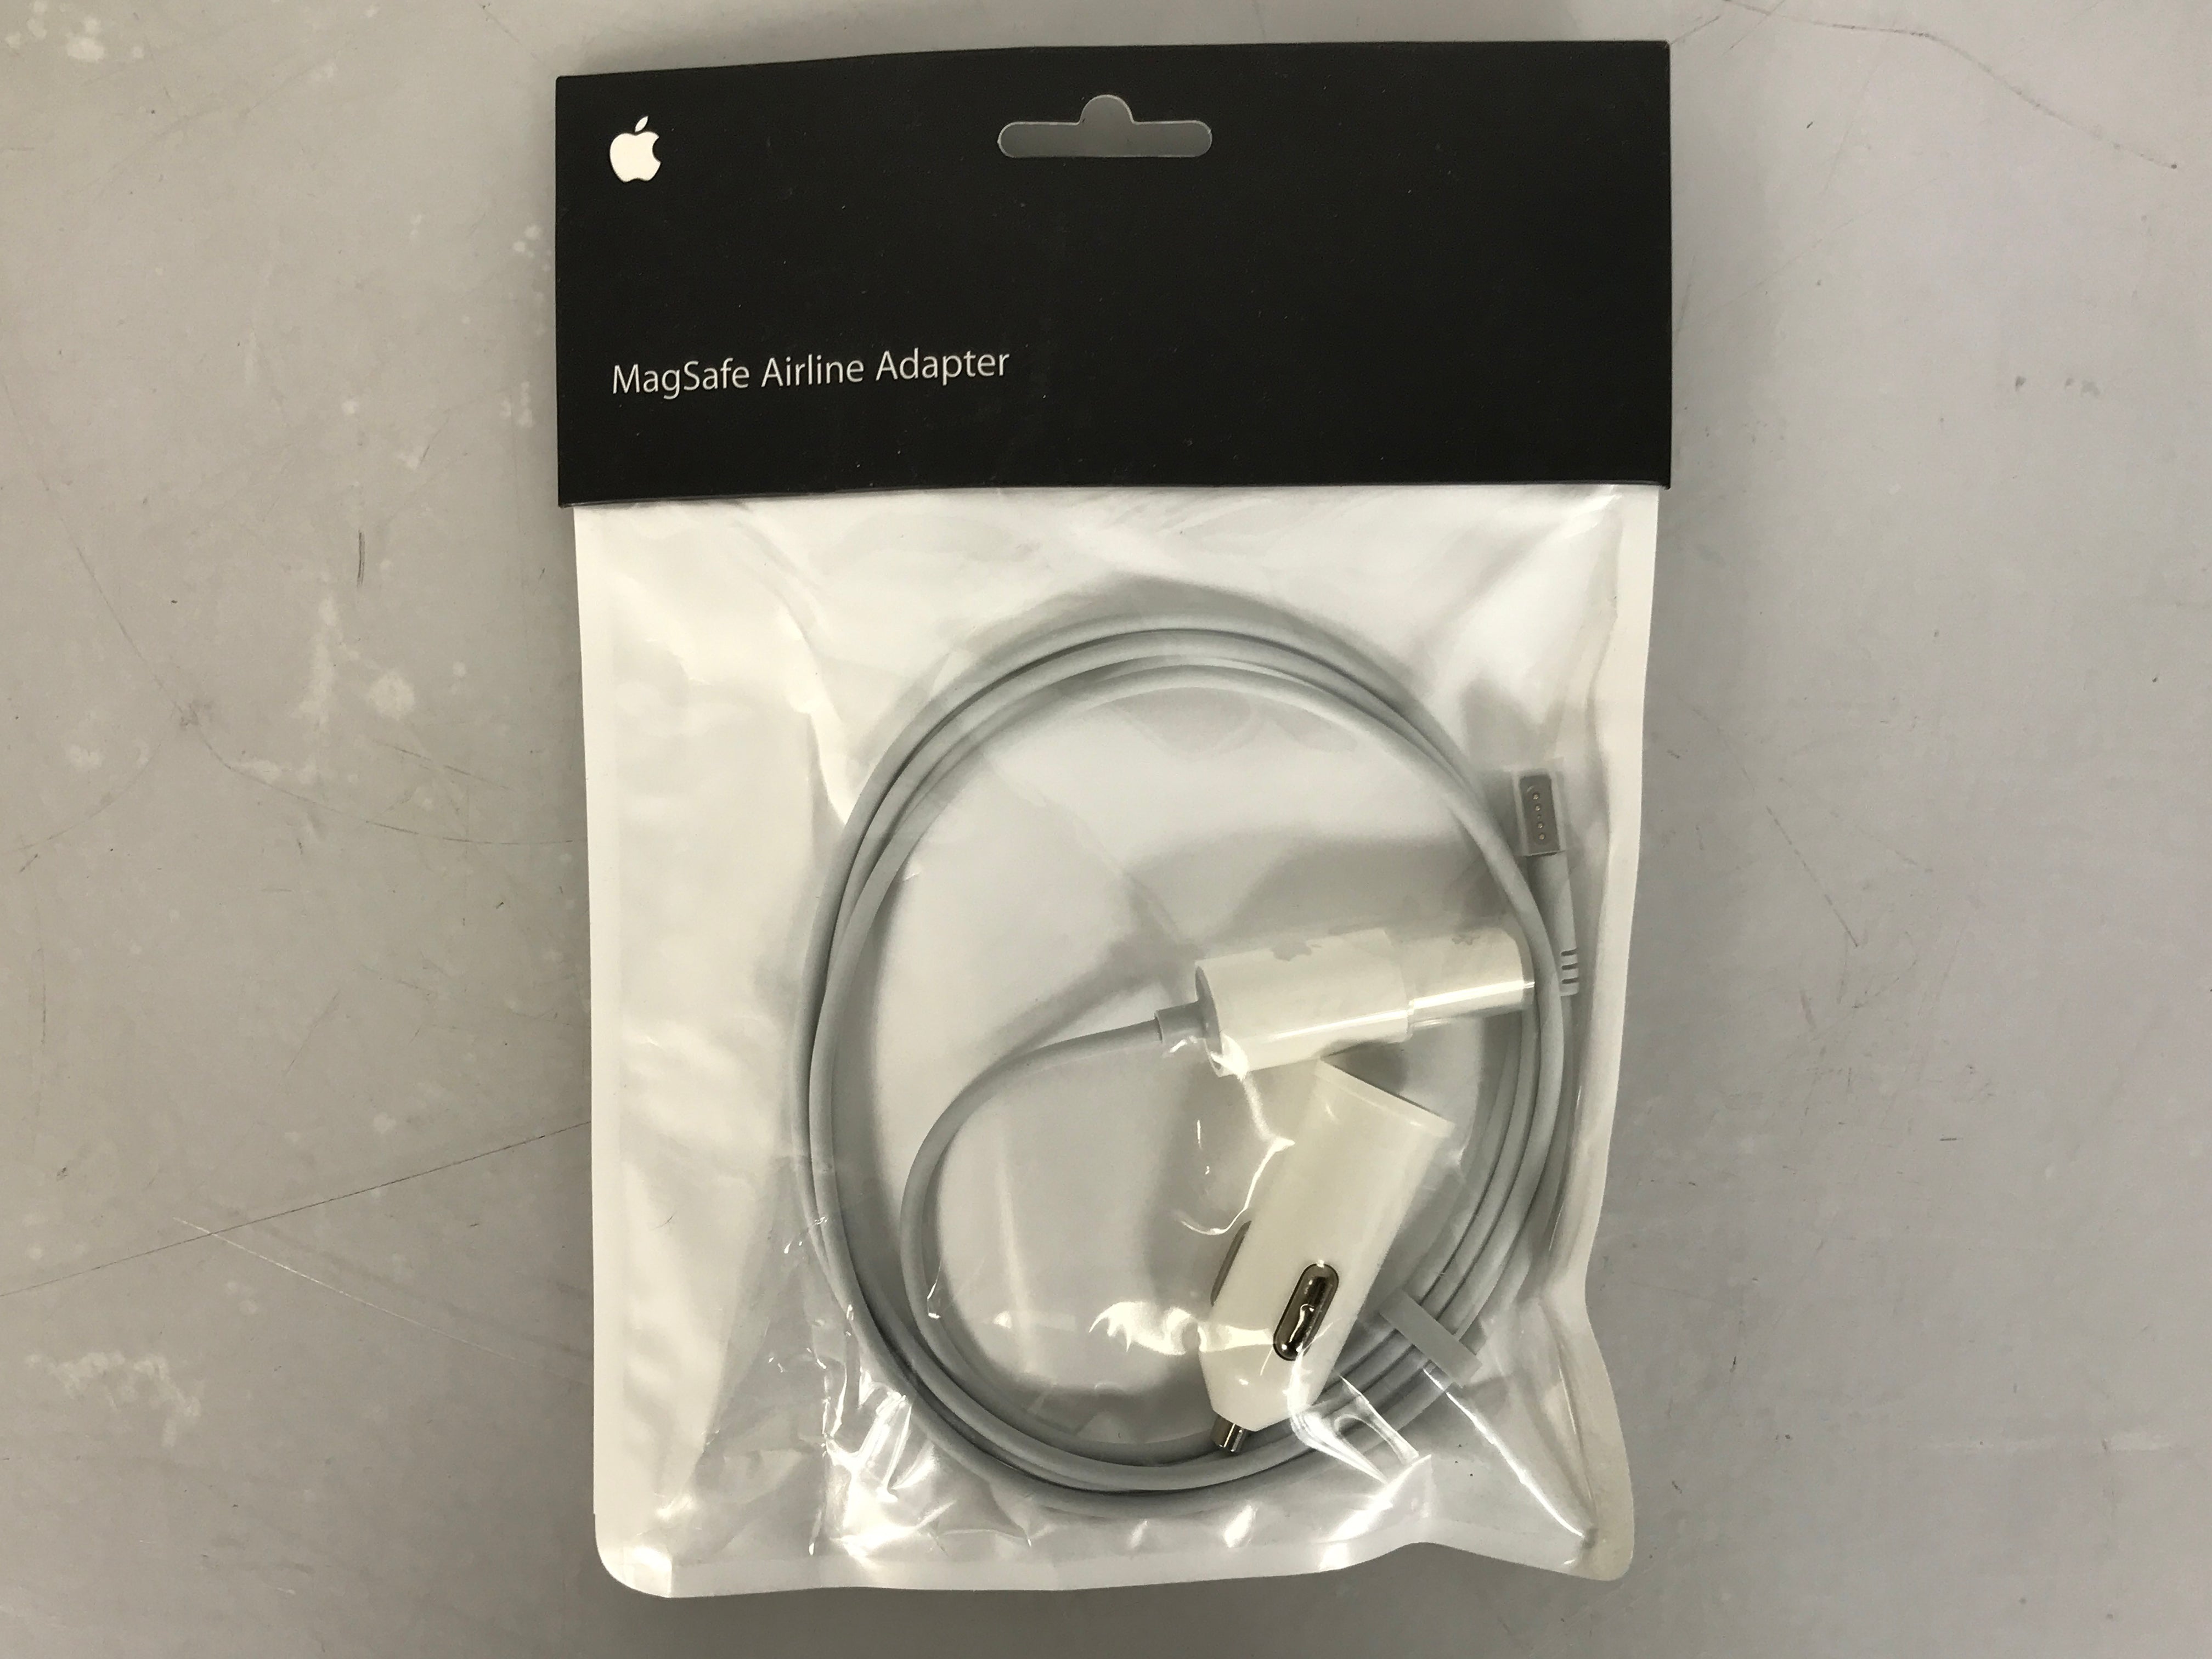 Apple MB441Z/A MagSafe Airline Adapter